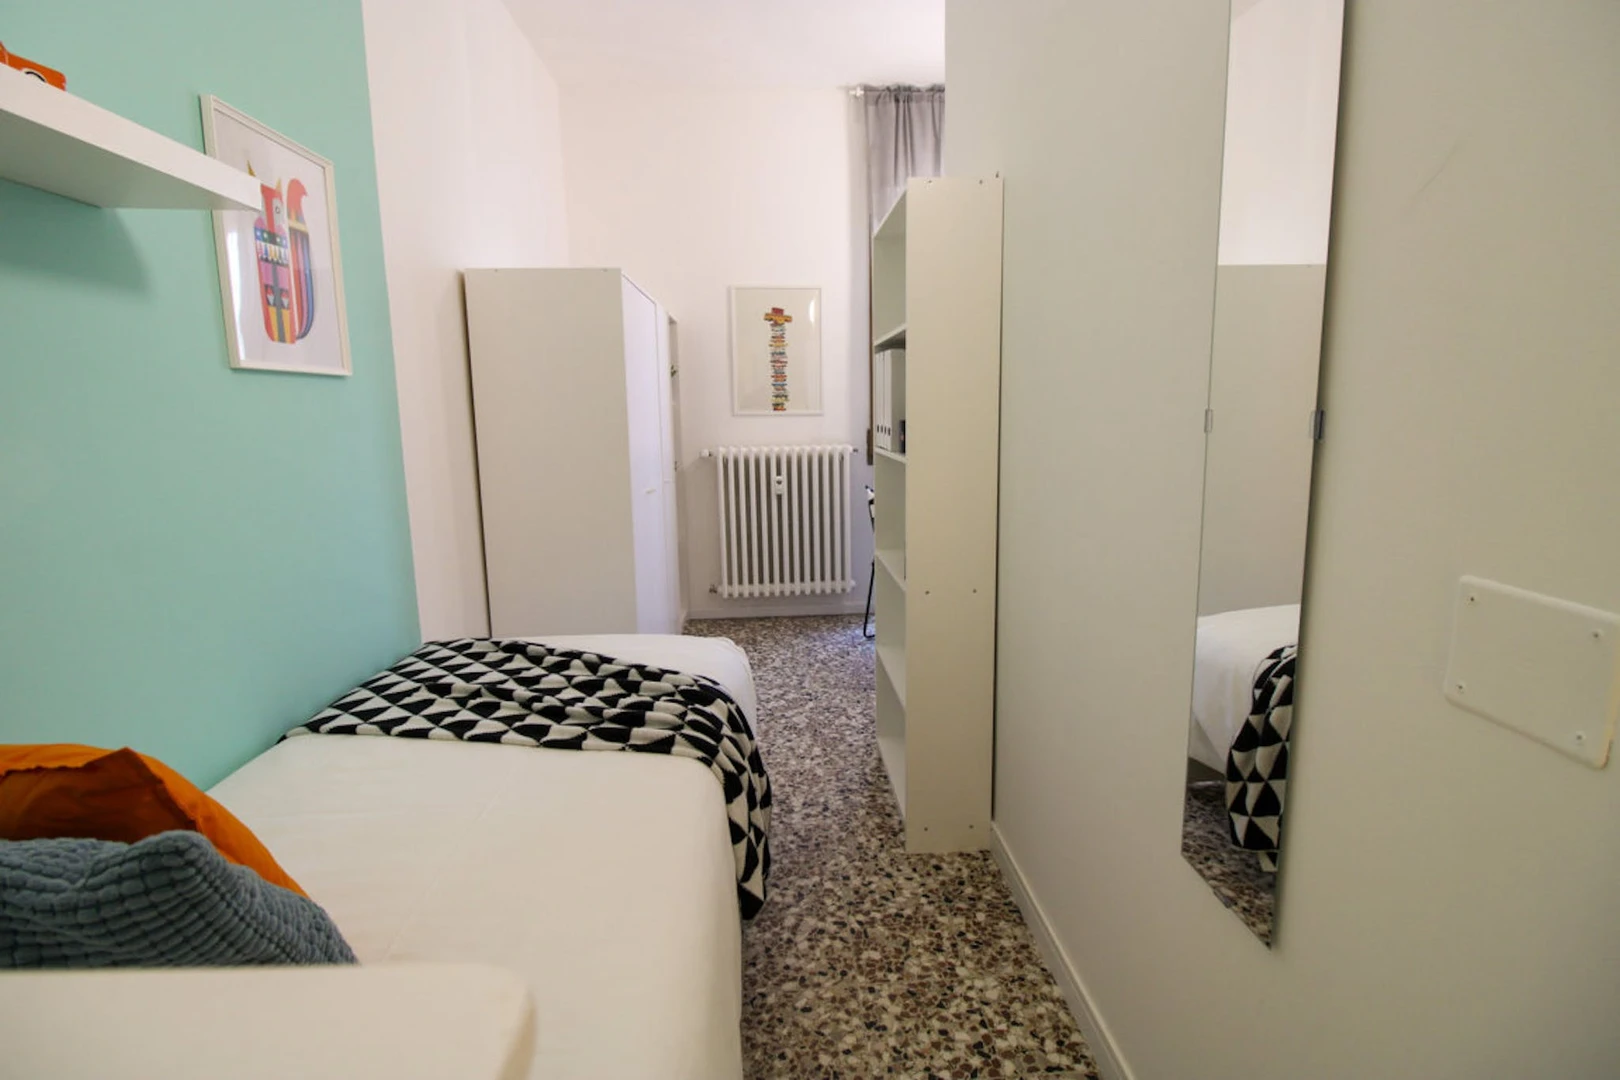 Cheap private room in Pavia